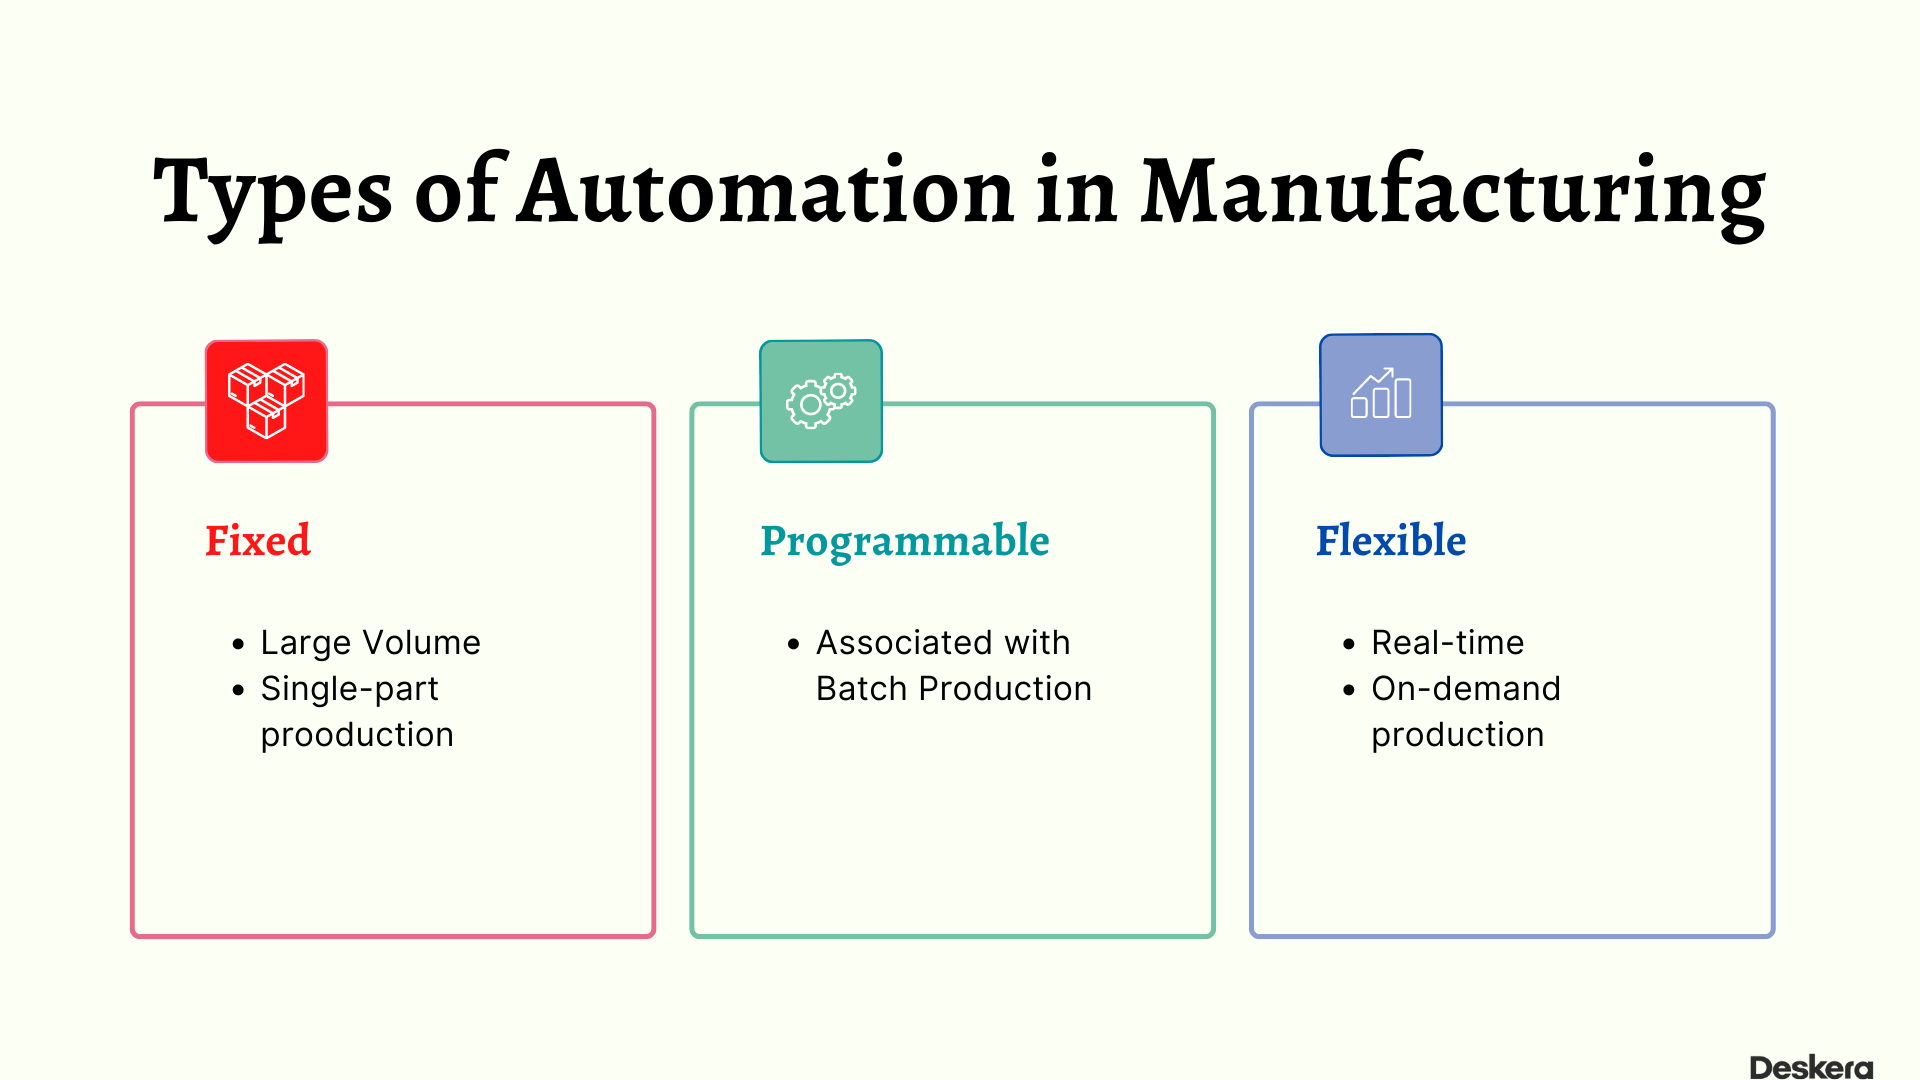 Types of Automation in Manufacturing